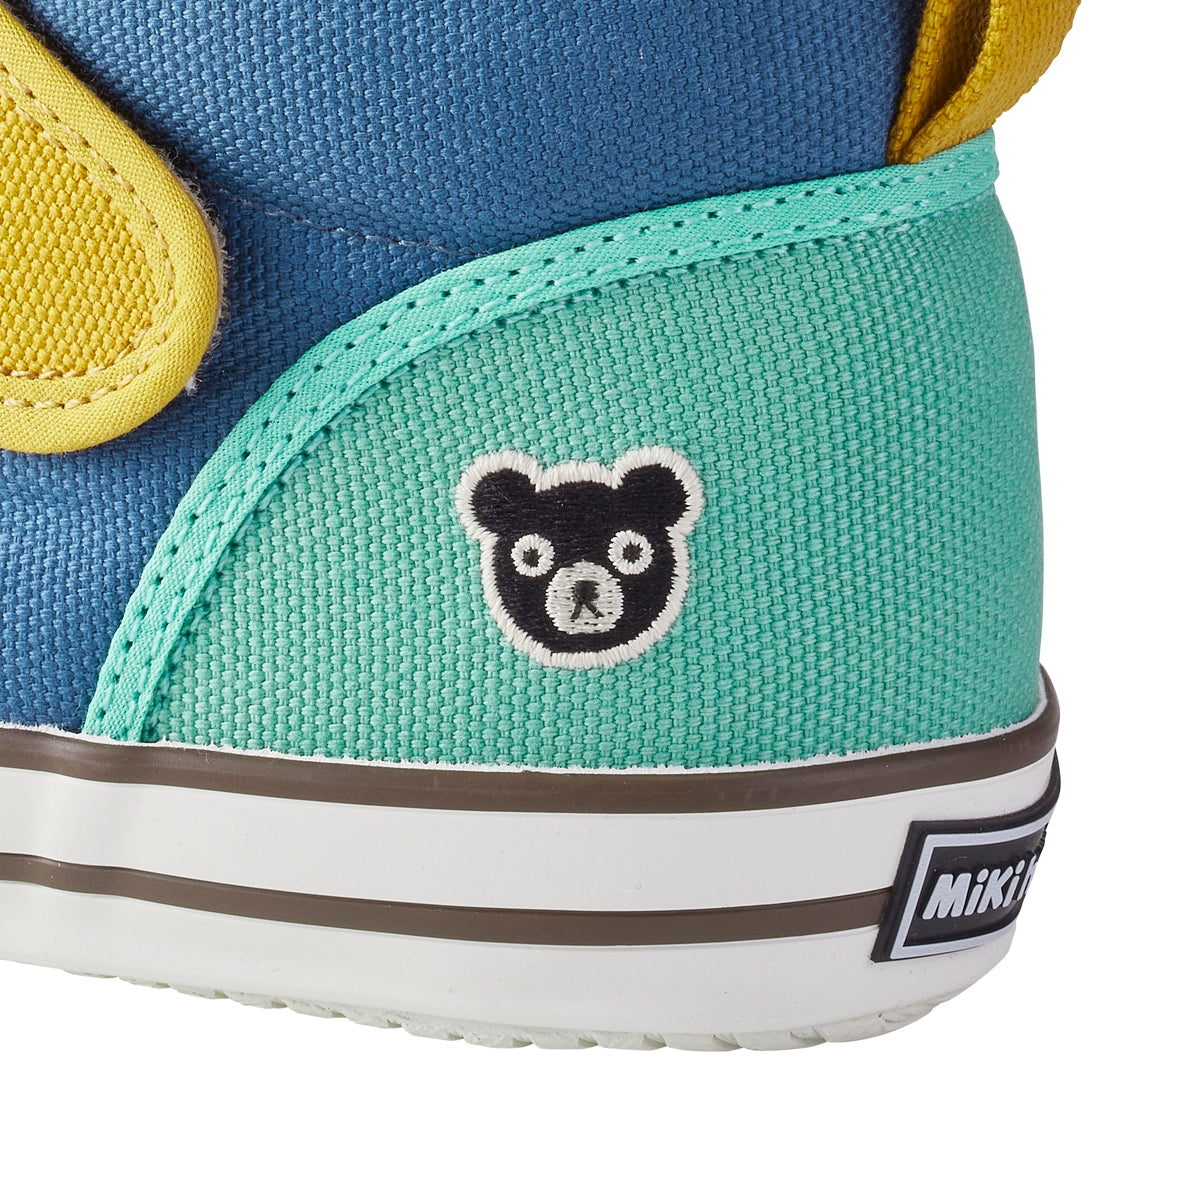 Oxford-Meets-Texture Sneakers for Kids